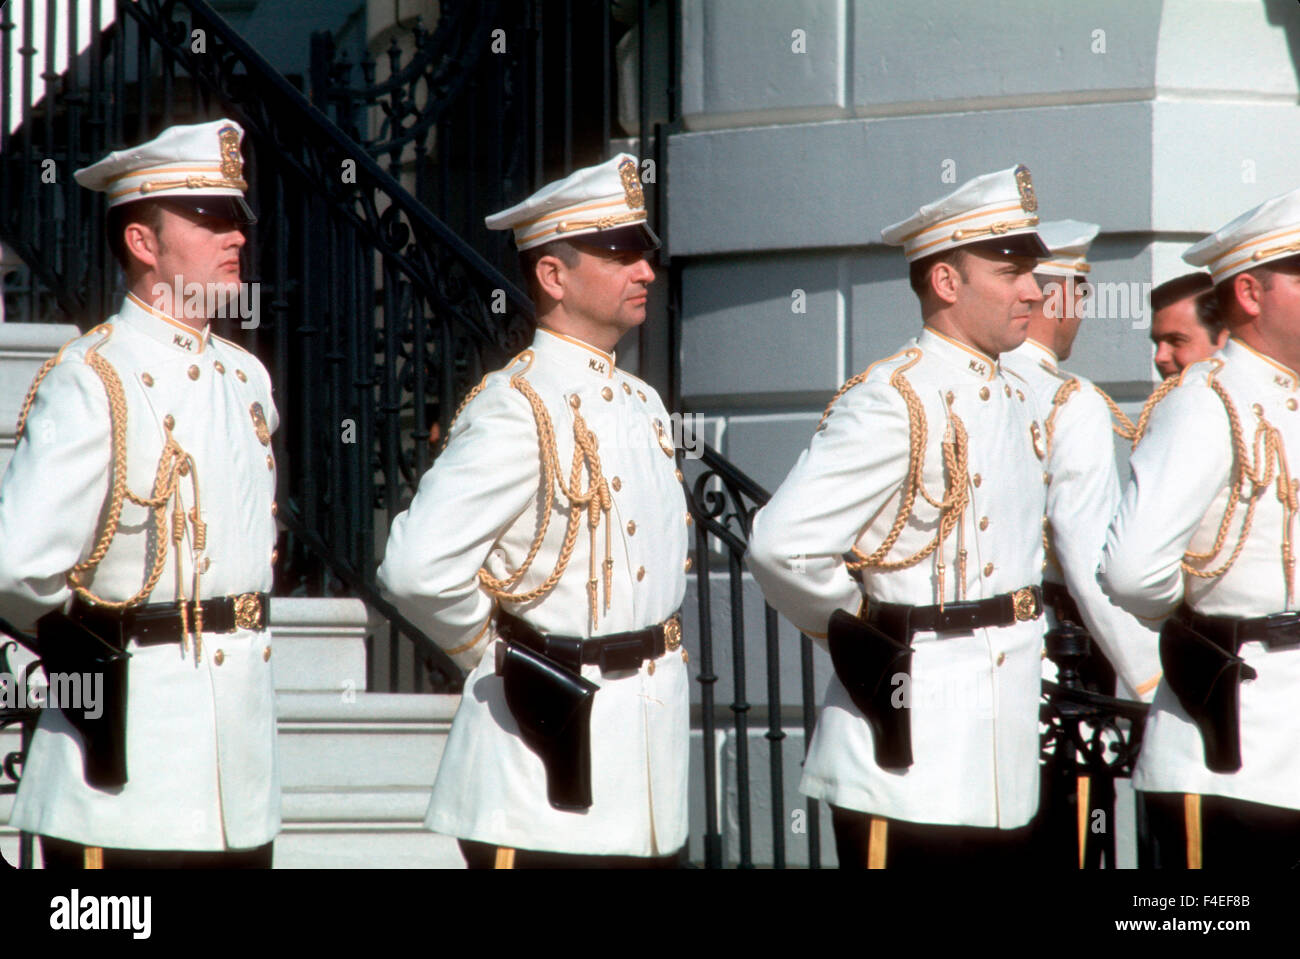 the-uniforms-of-the-white-house-police-worn-at-an-arrival-ceremony-F4EF8B.jpg